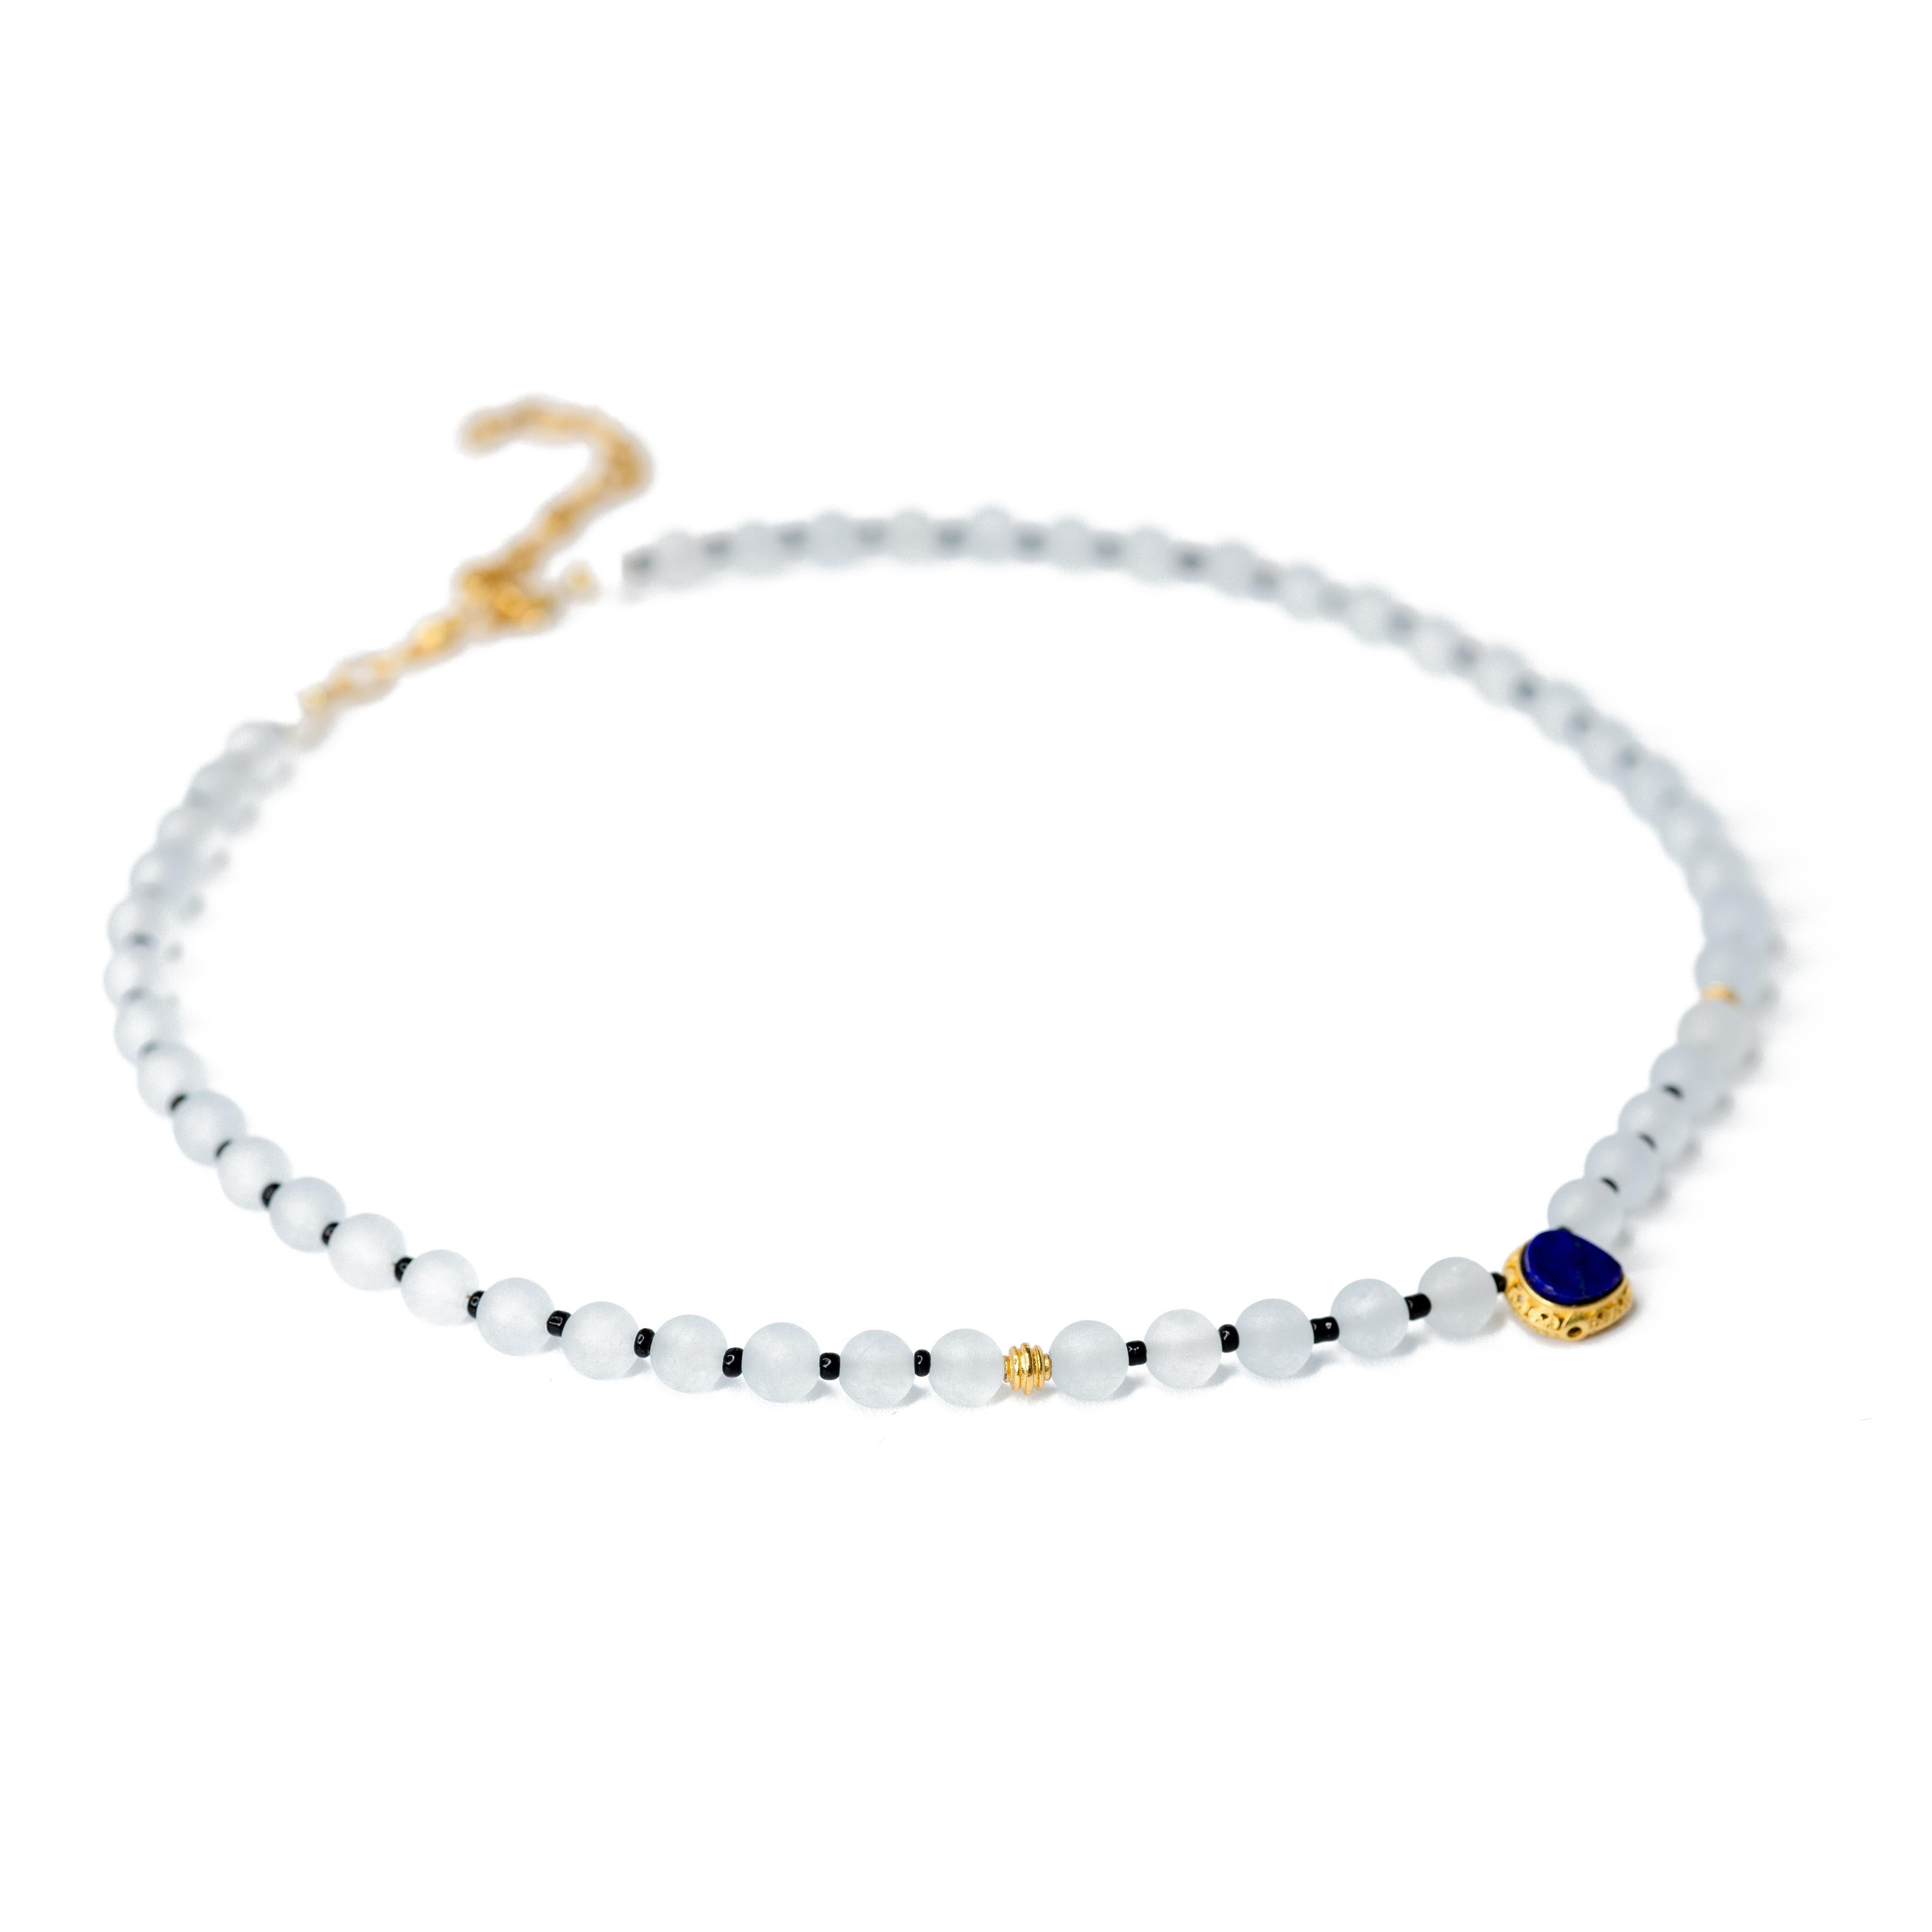 This necklace is crafted from Malaysian Jade Beads, Lapis Lazuli Pendant, inspired by the oil painting 'Water Bridge, Sunlight Effect', painted by Claude Monet.
	•	18